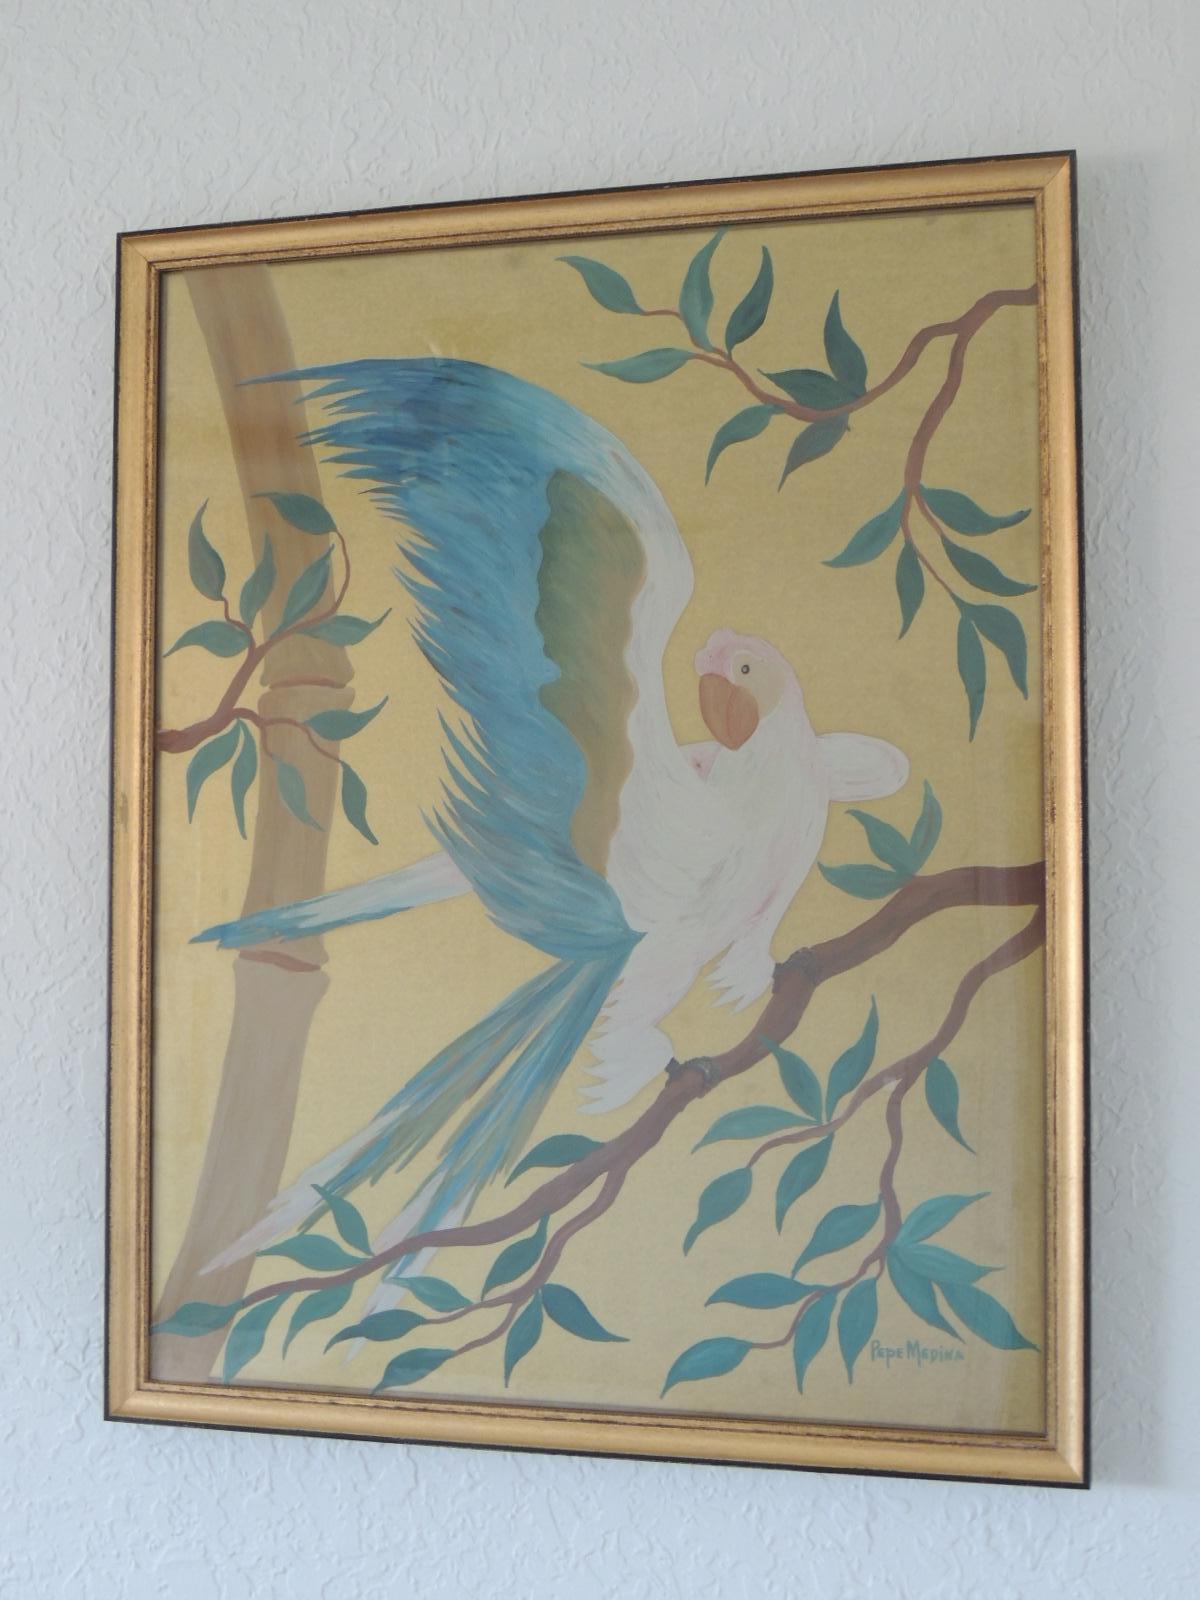 Two large portraits of white parrots on bamboo vines.
Oil on gold leaf boards. Newly framed in gold leaf antique style
frames and museum quality plexiglass.
Amazing pinkish white plumage and aqua blue under wind feathers.
Art work in shades of,